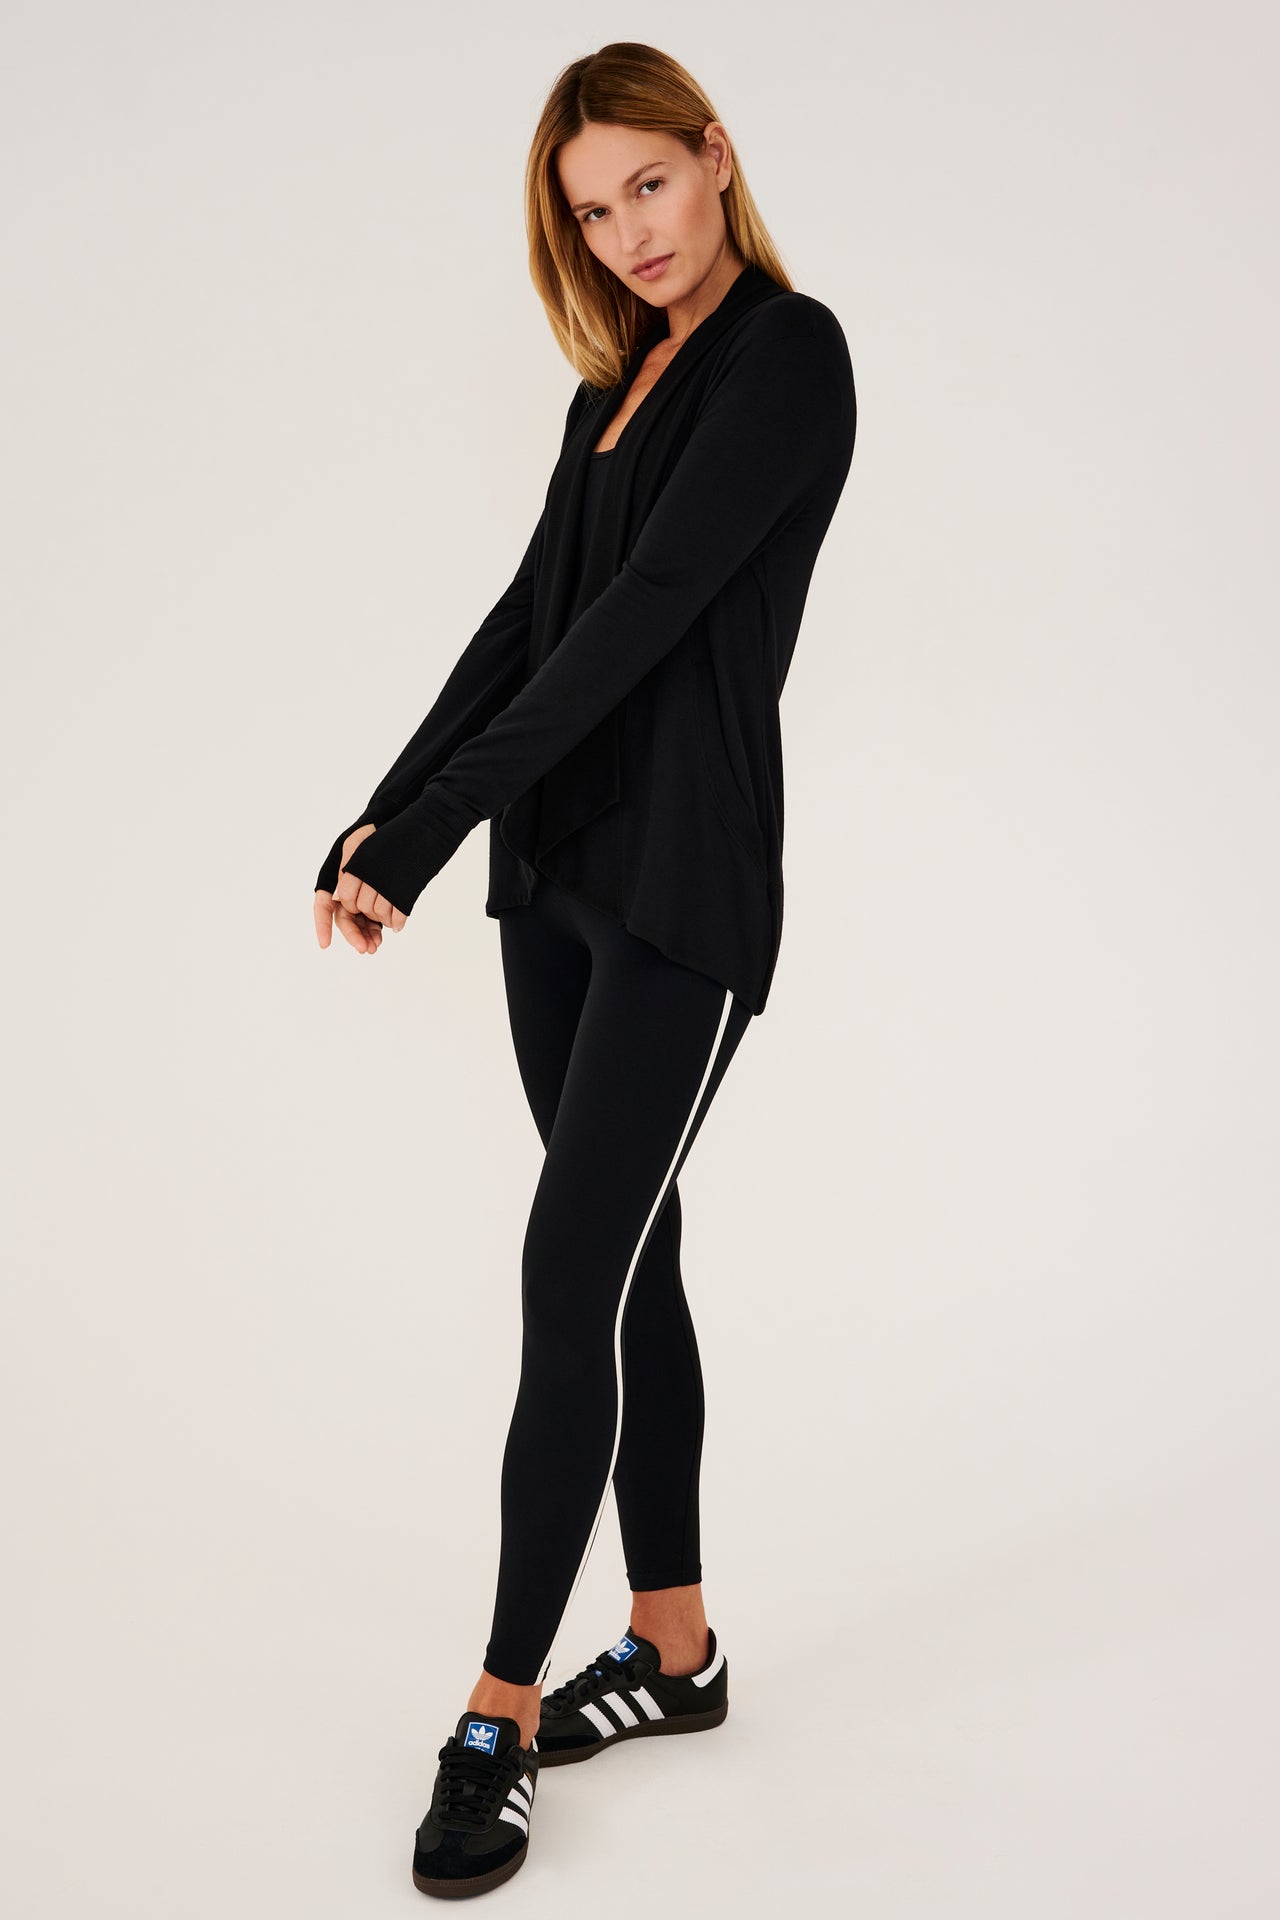 Full side view of girl wearing black long sleeve open front flowy sweater with thumb holes on sleeve cuff and black top with black leggings and black shoes